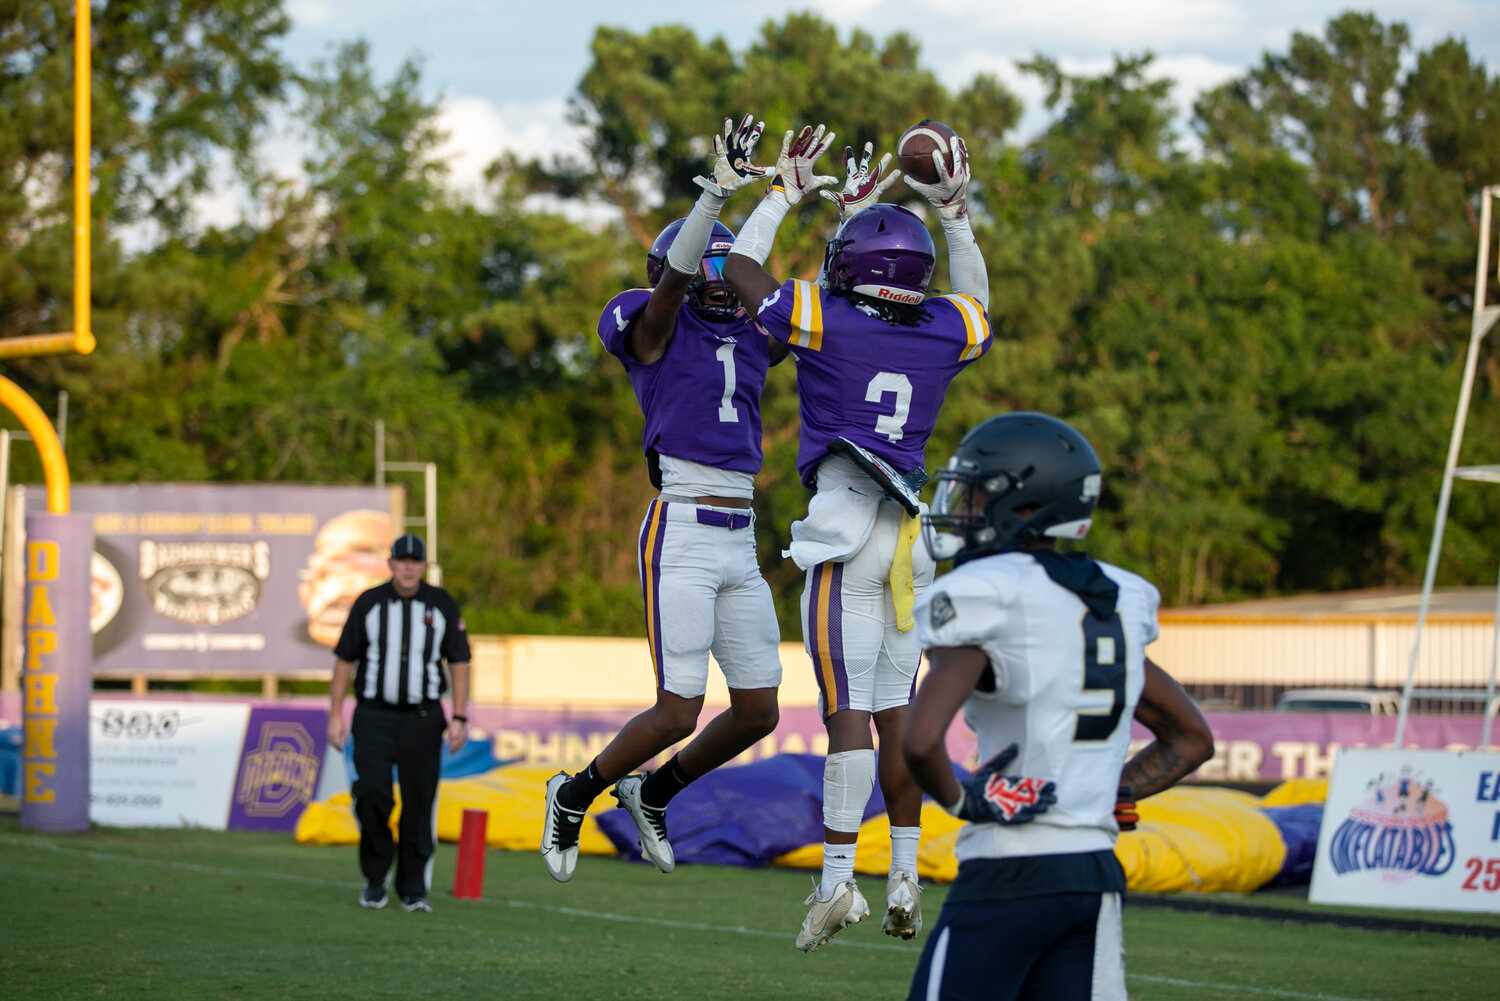 Daphne rising junior RJ Dailey (3) celebrates his second touchdown of the night that helped the Trojans beat Foley 21-17 in the spring exhibition game Friday night at Jubilee Stadium.